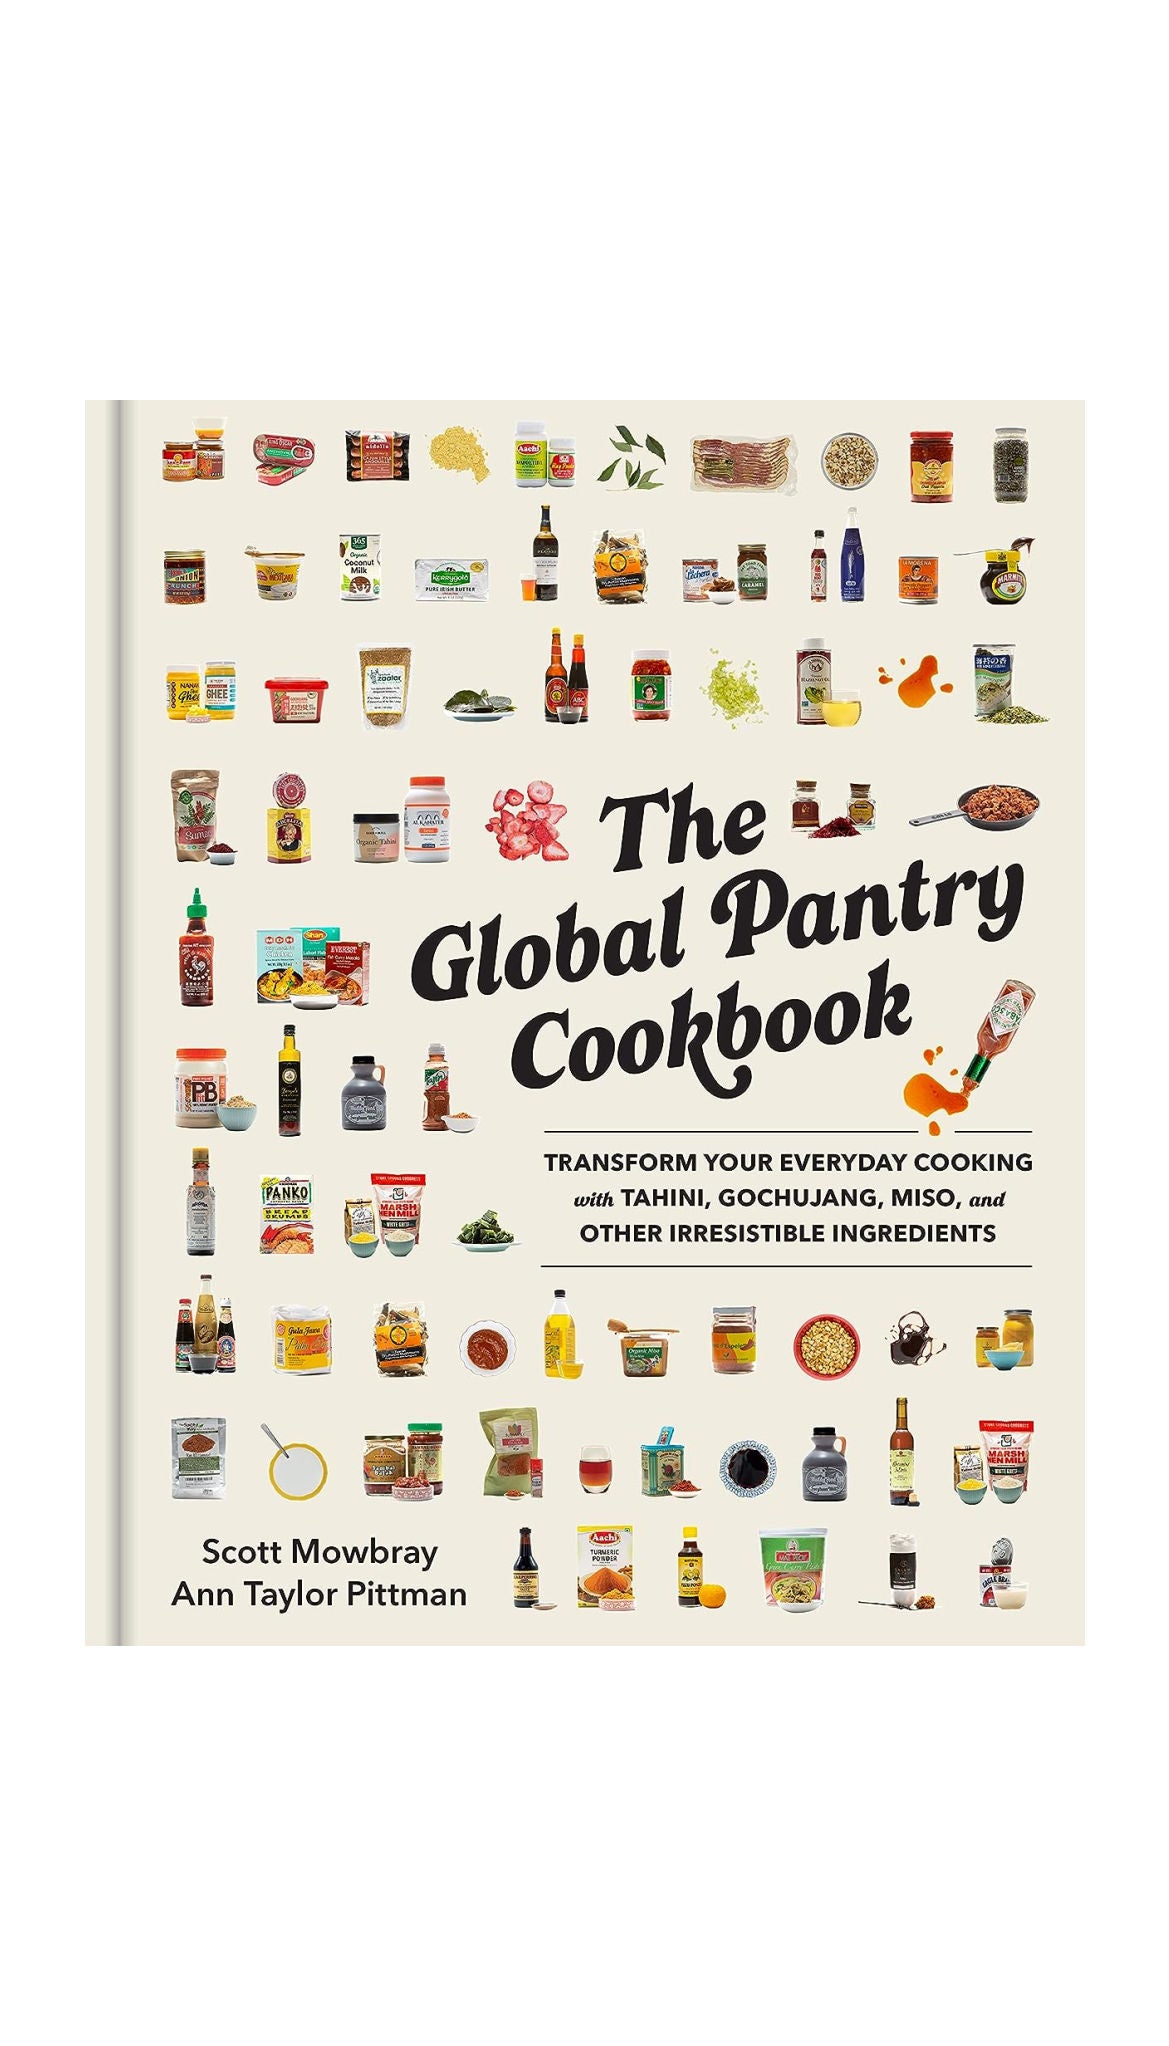 The Global Pantry Cookbook